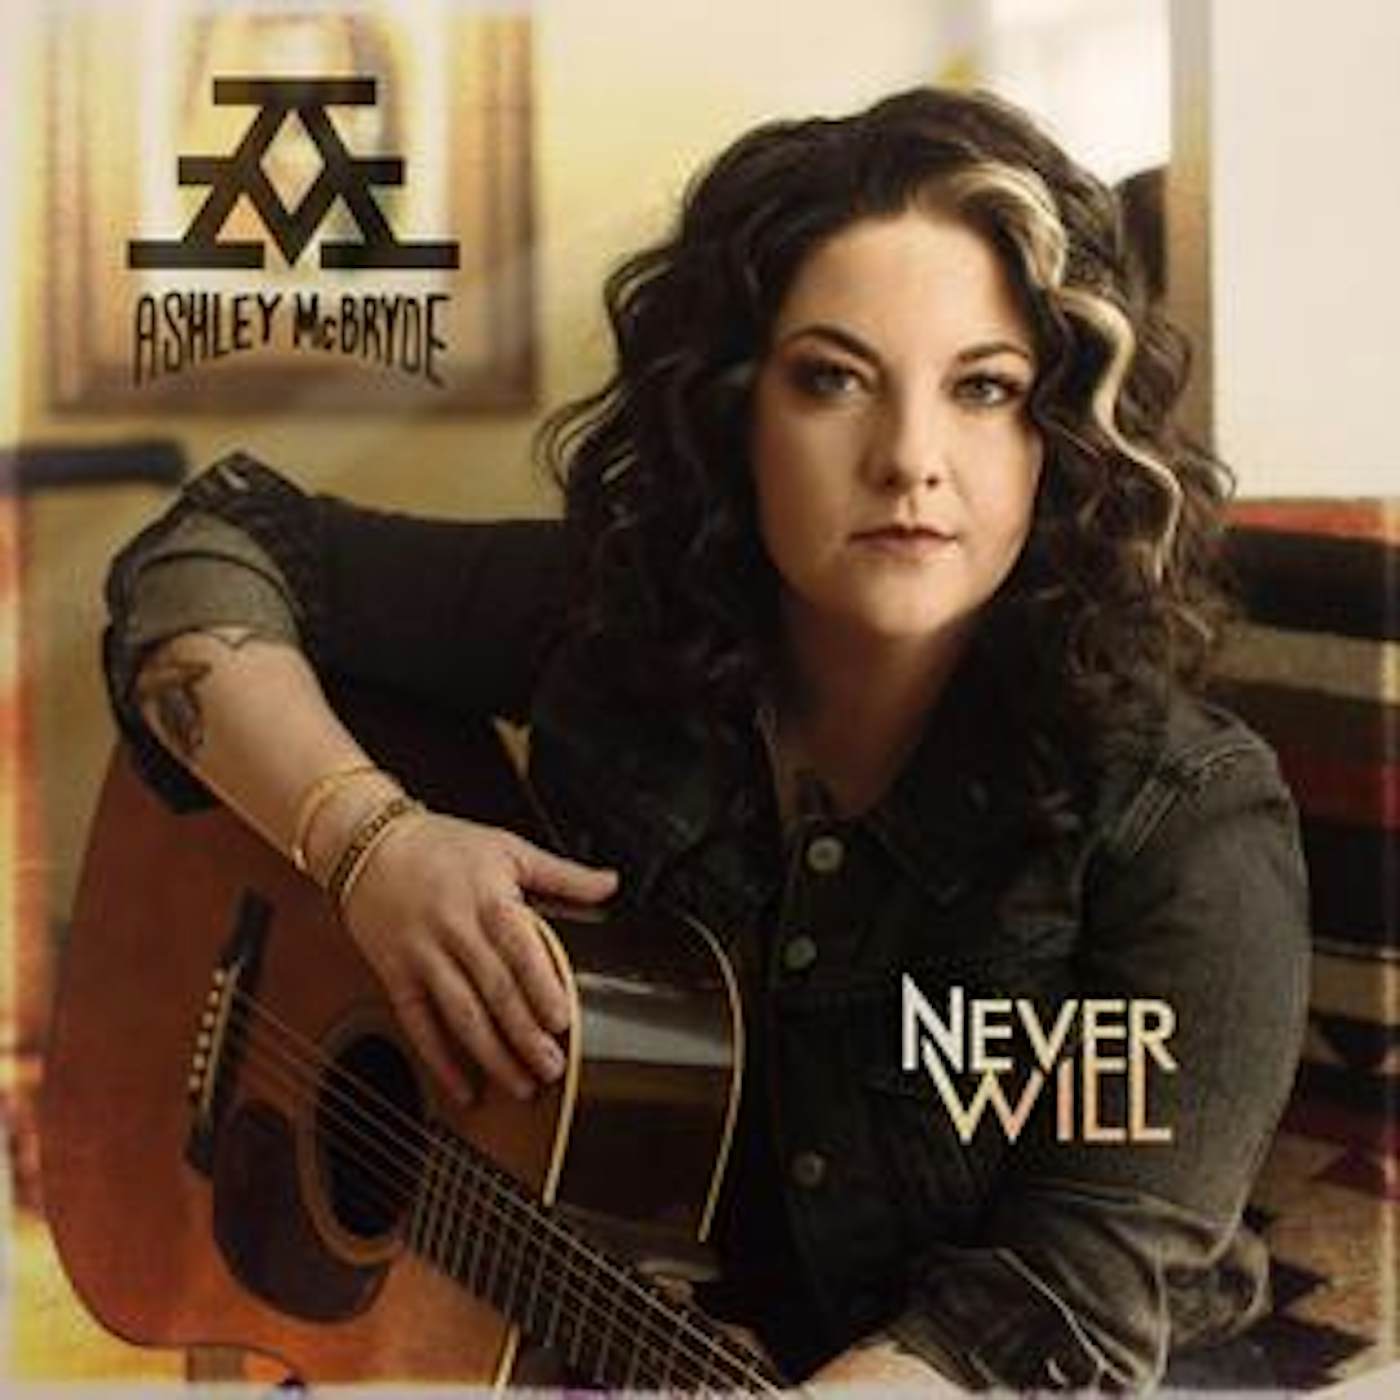 Ashley McBryde NEVER WILL CD